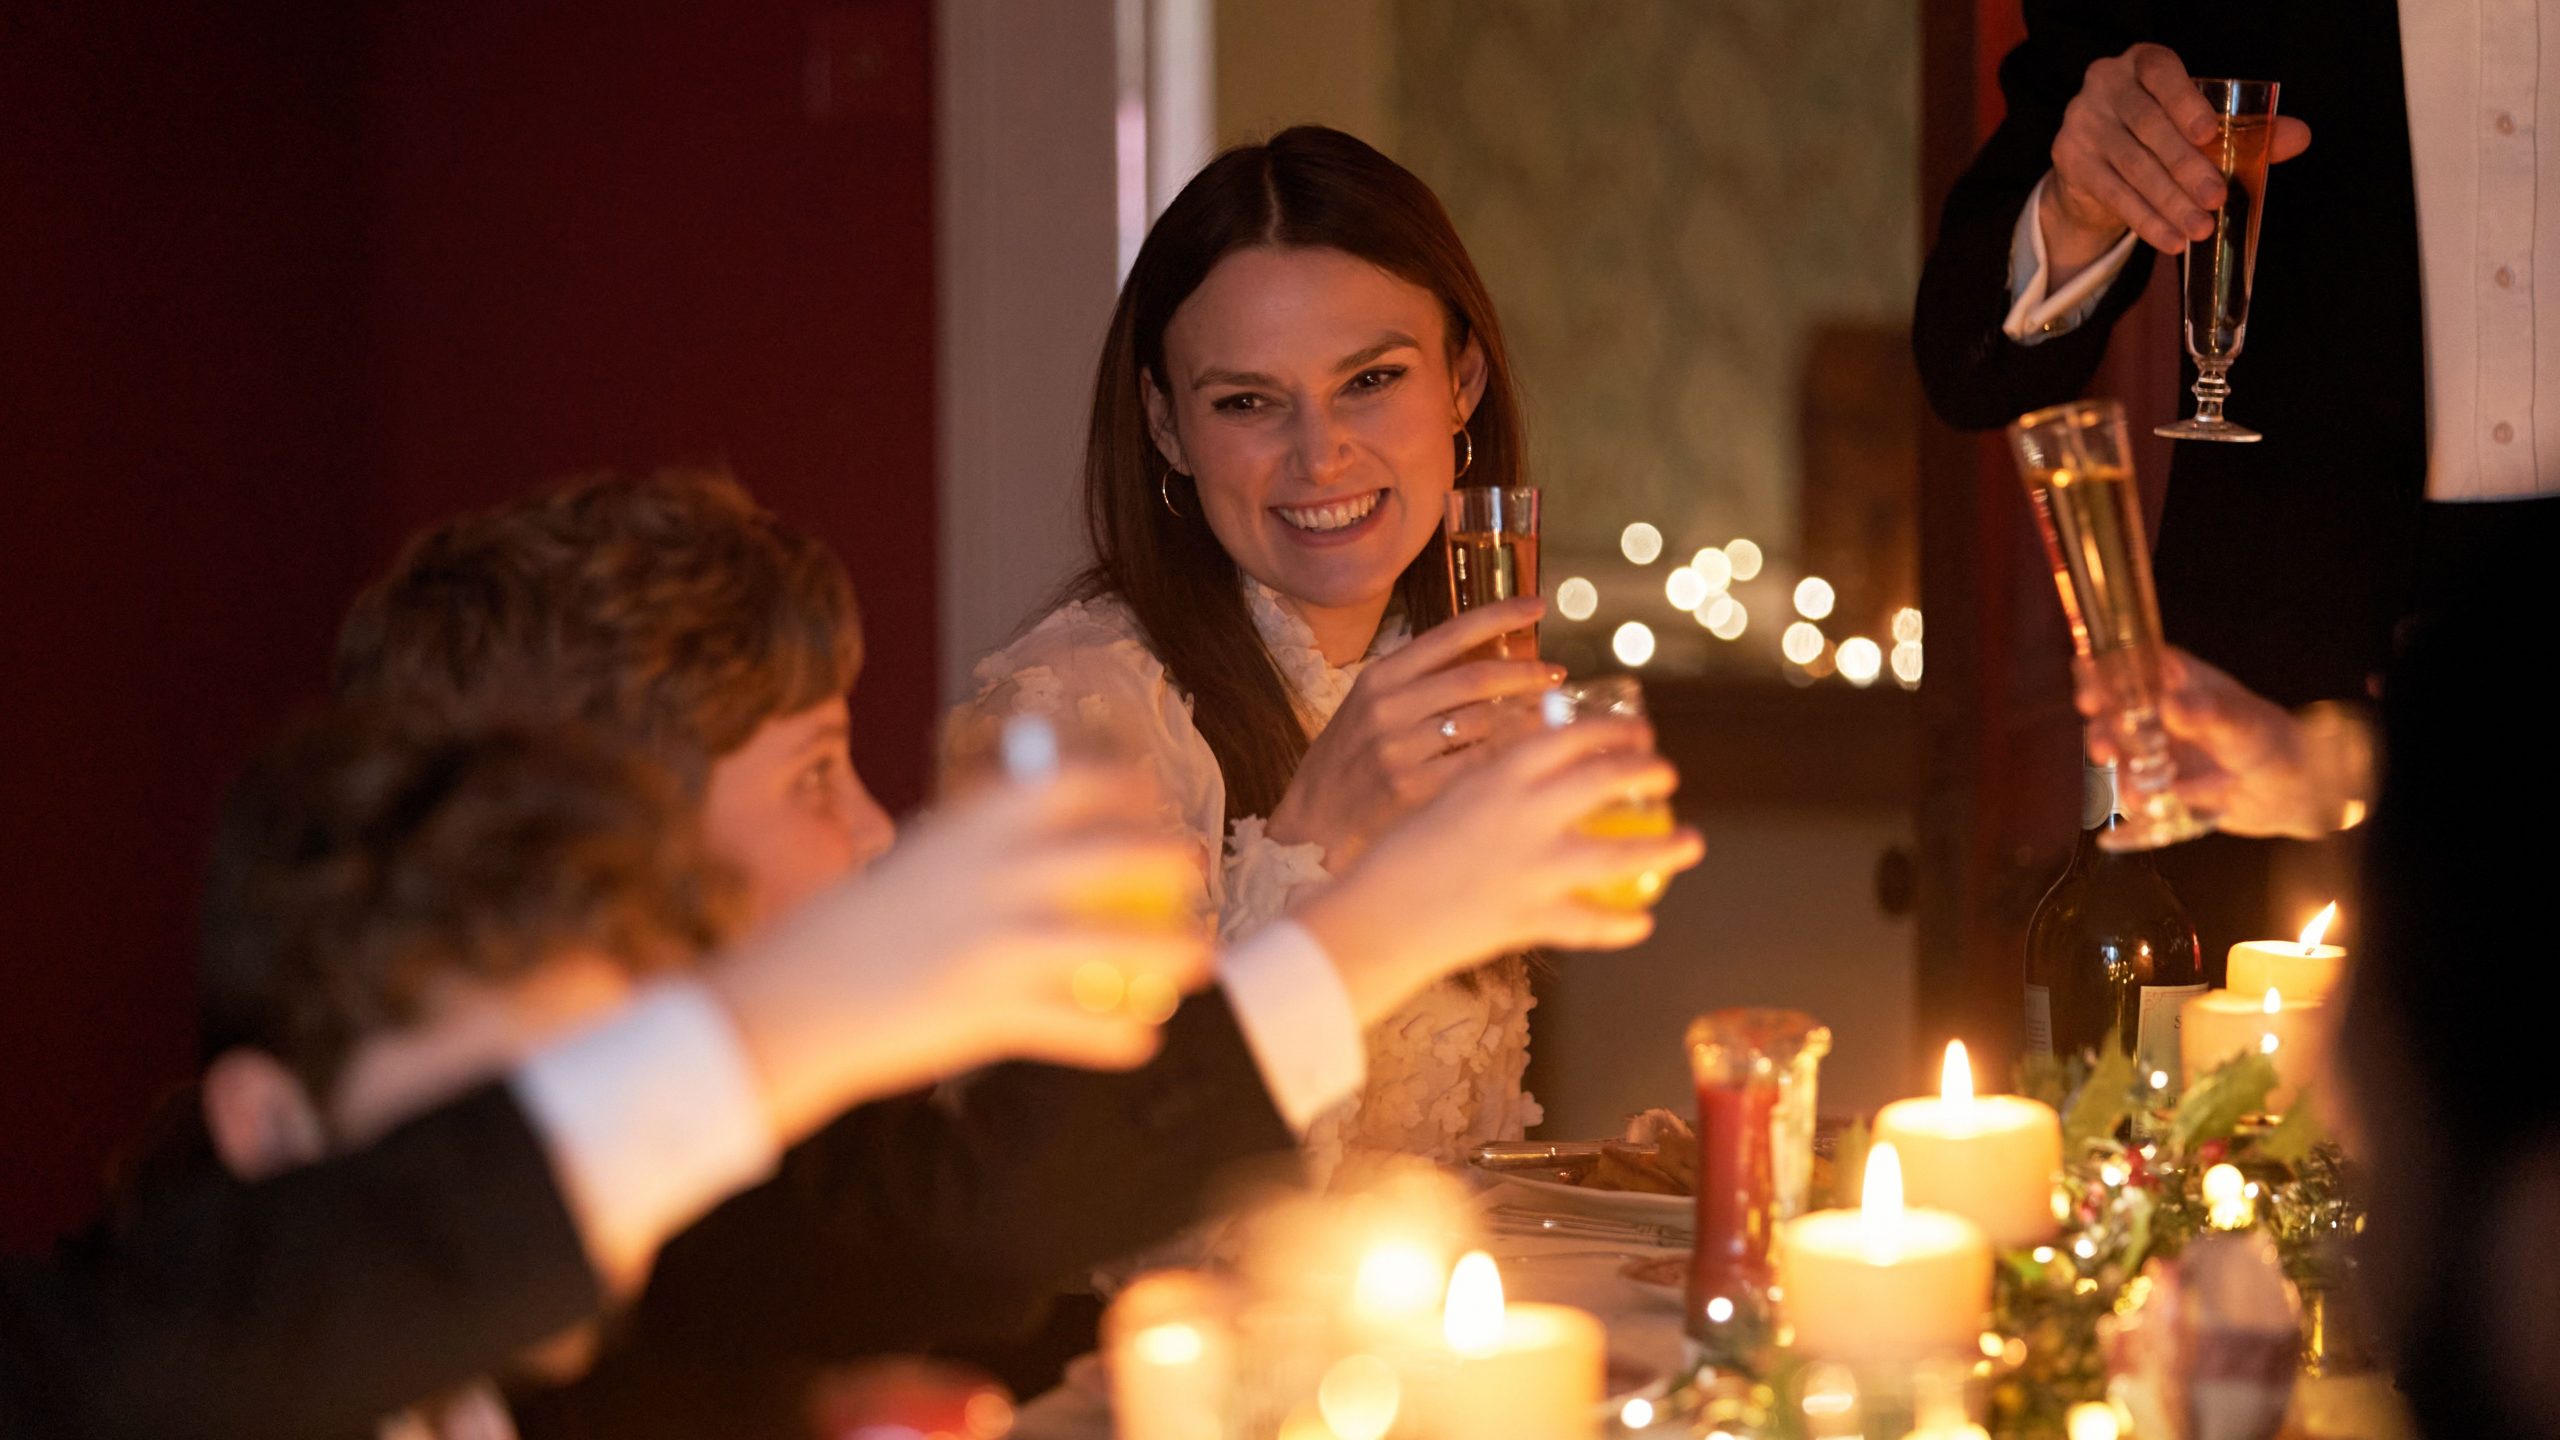 Keira Knightley and her family raise a toast to the apocalypse at a fancy holiday dinner as seen in the new horror comedy SILENT NIGHT. 